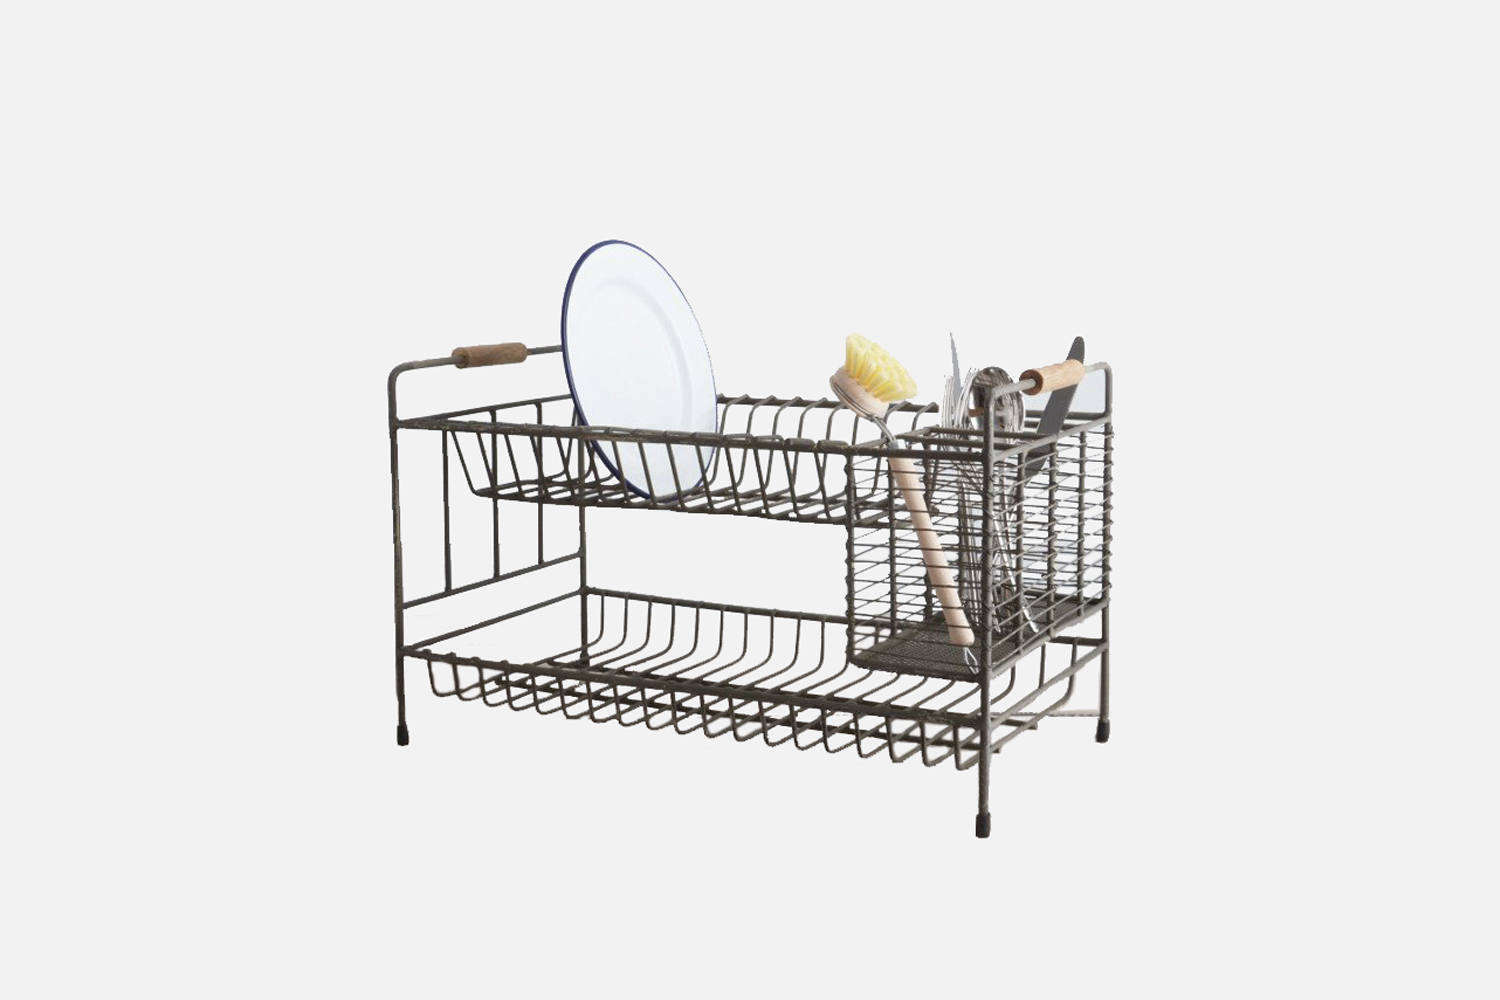 10 Easy Pieces: Space-Saving Dish Racks for Small Kitchens